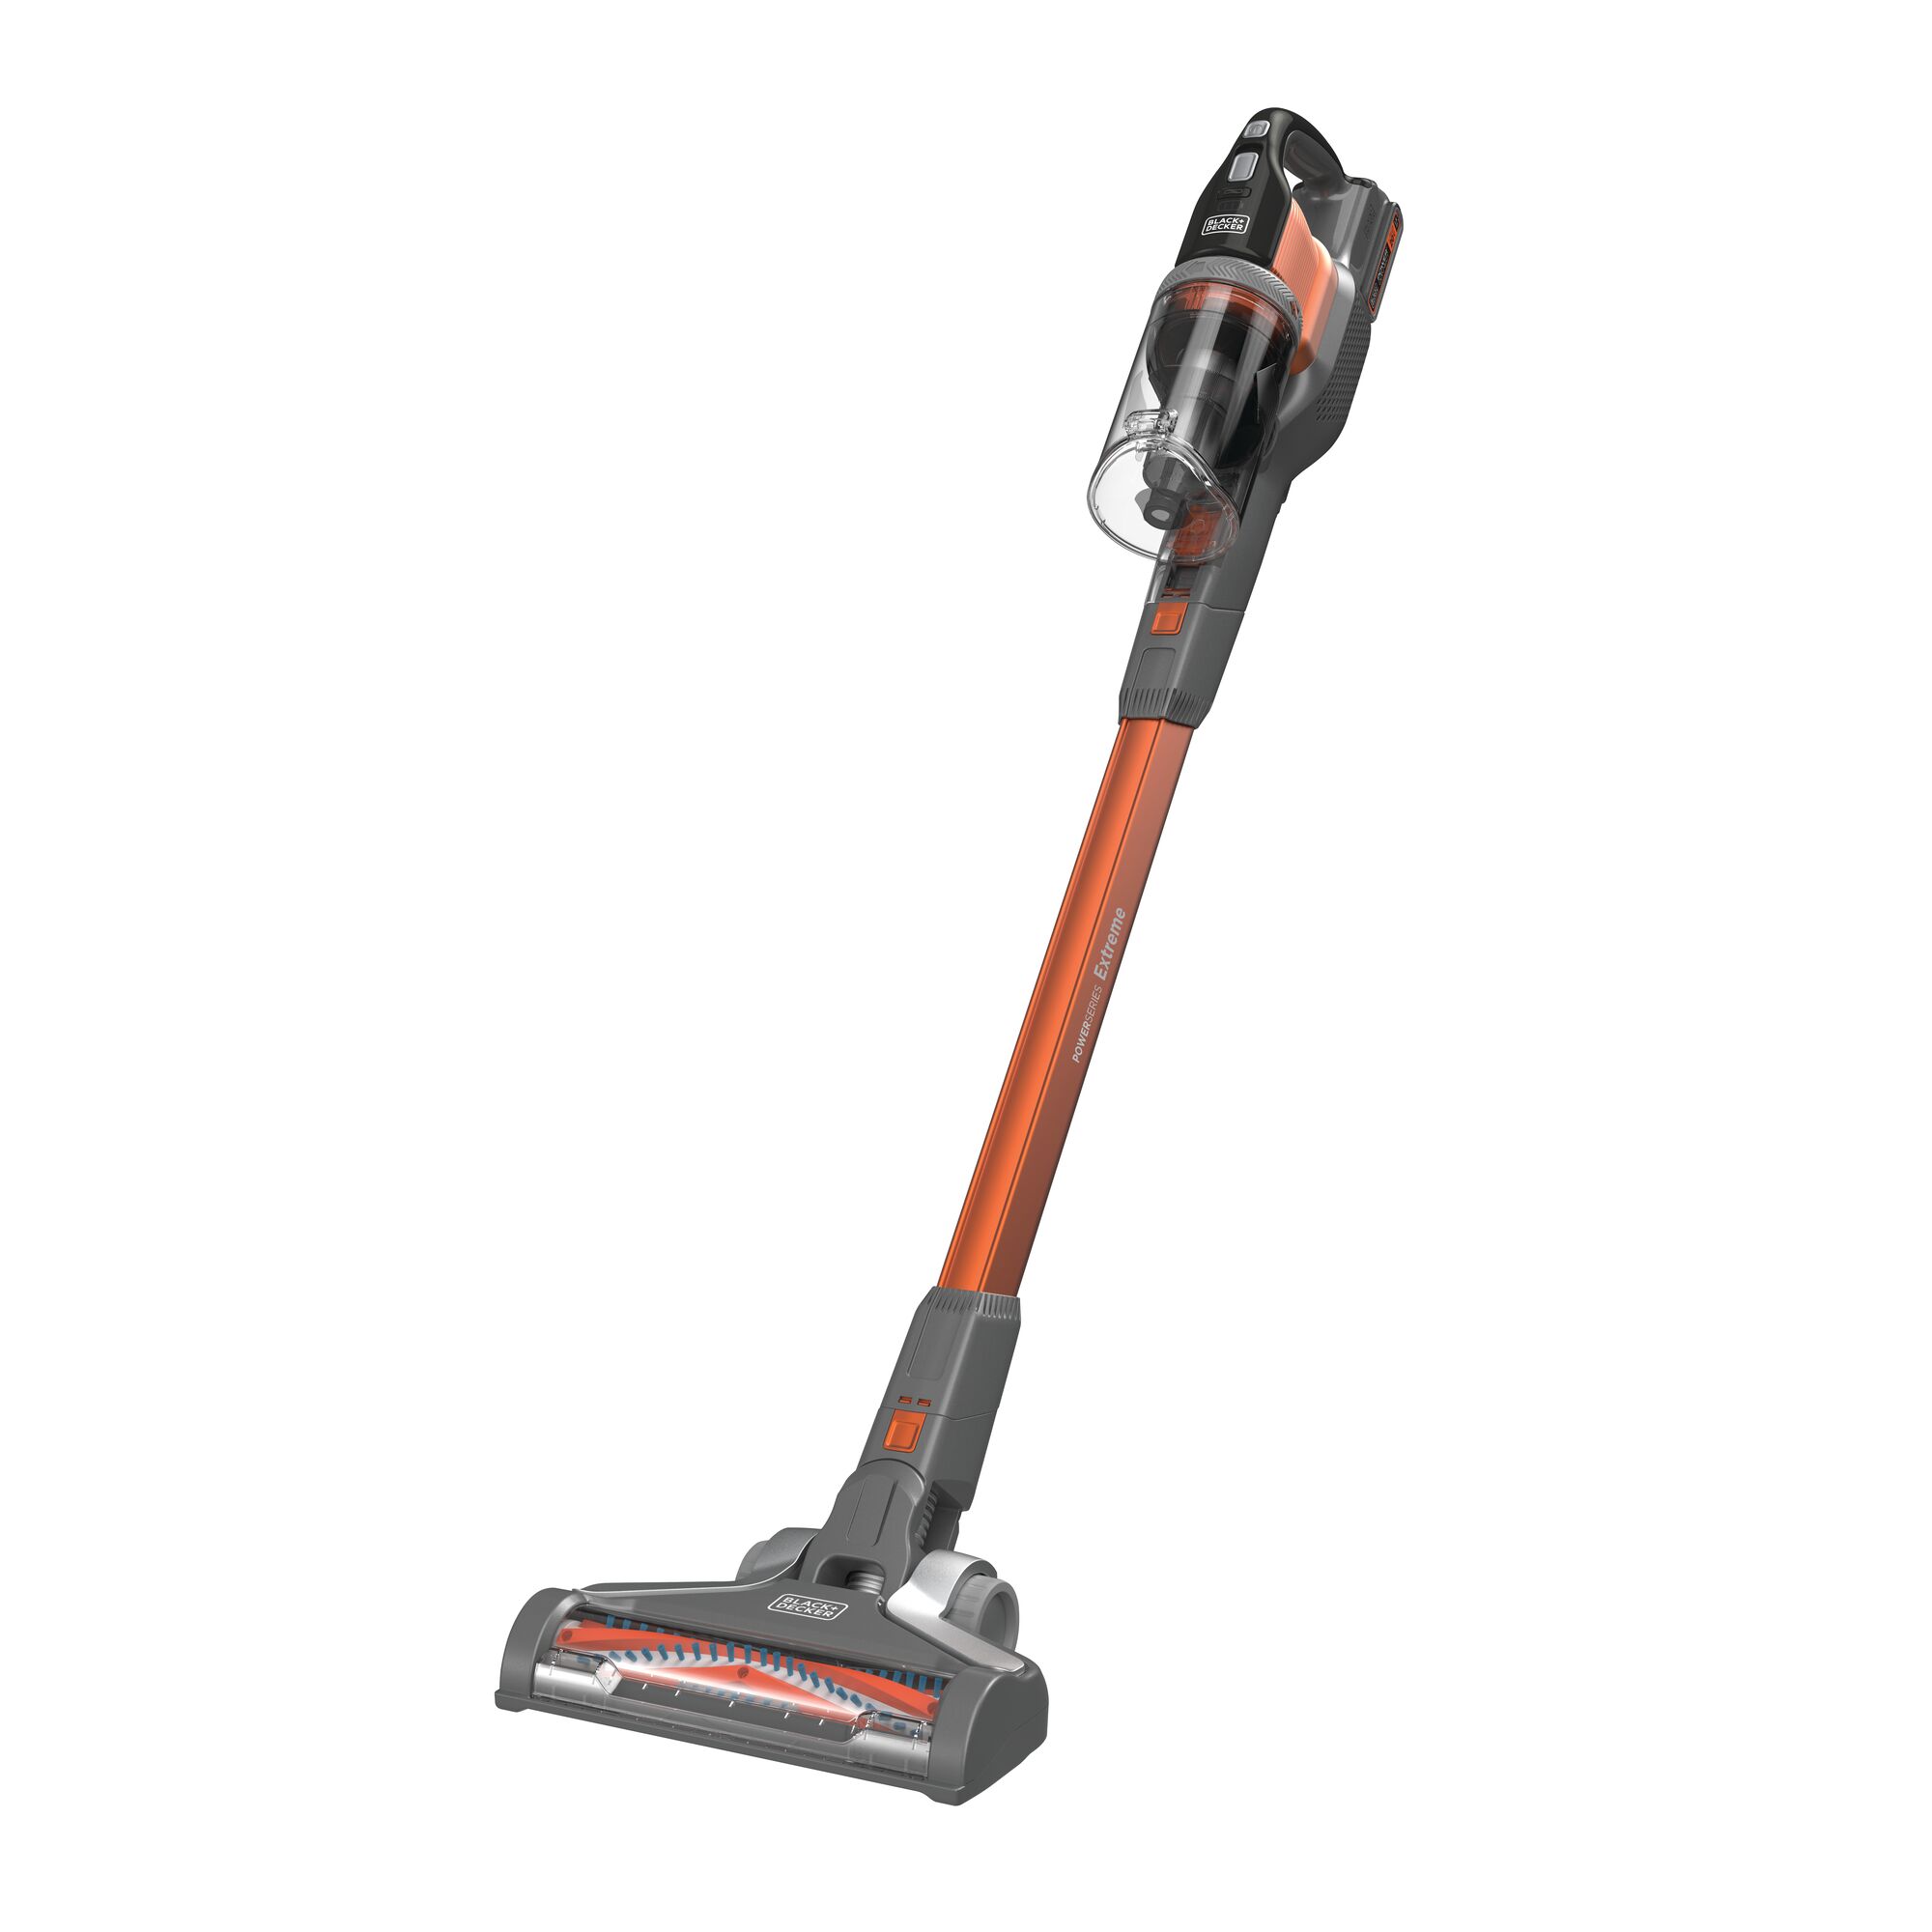 POWERSERIES Extreme Cordless Stick Vacuum Cleaner.